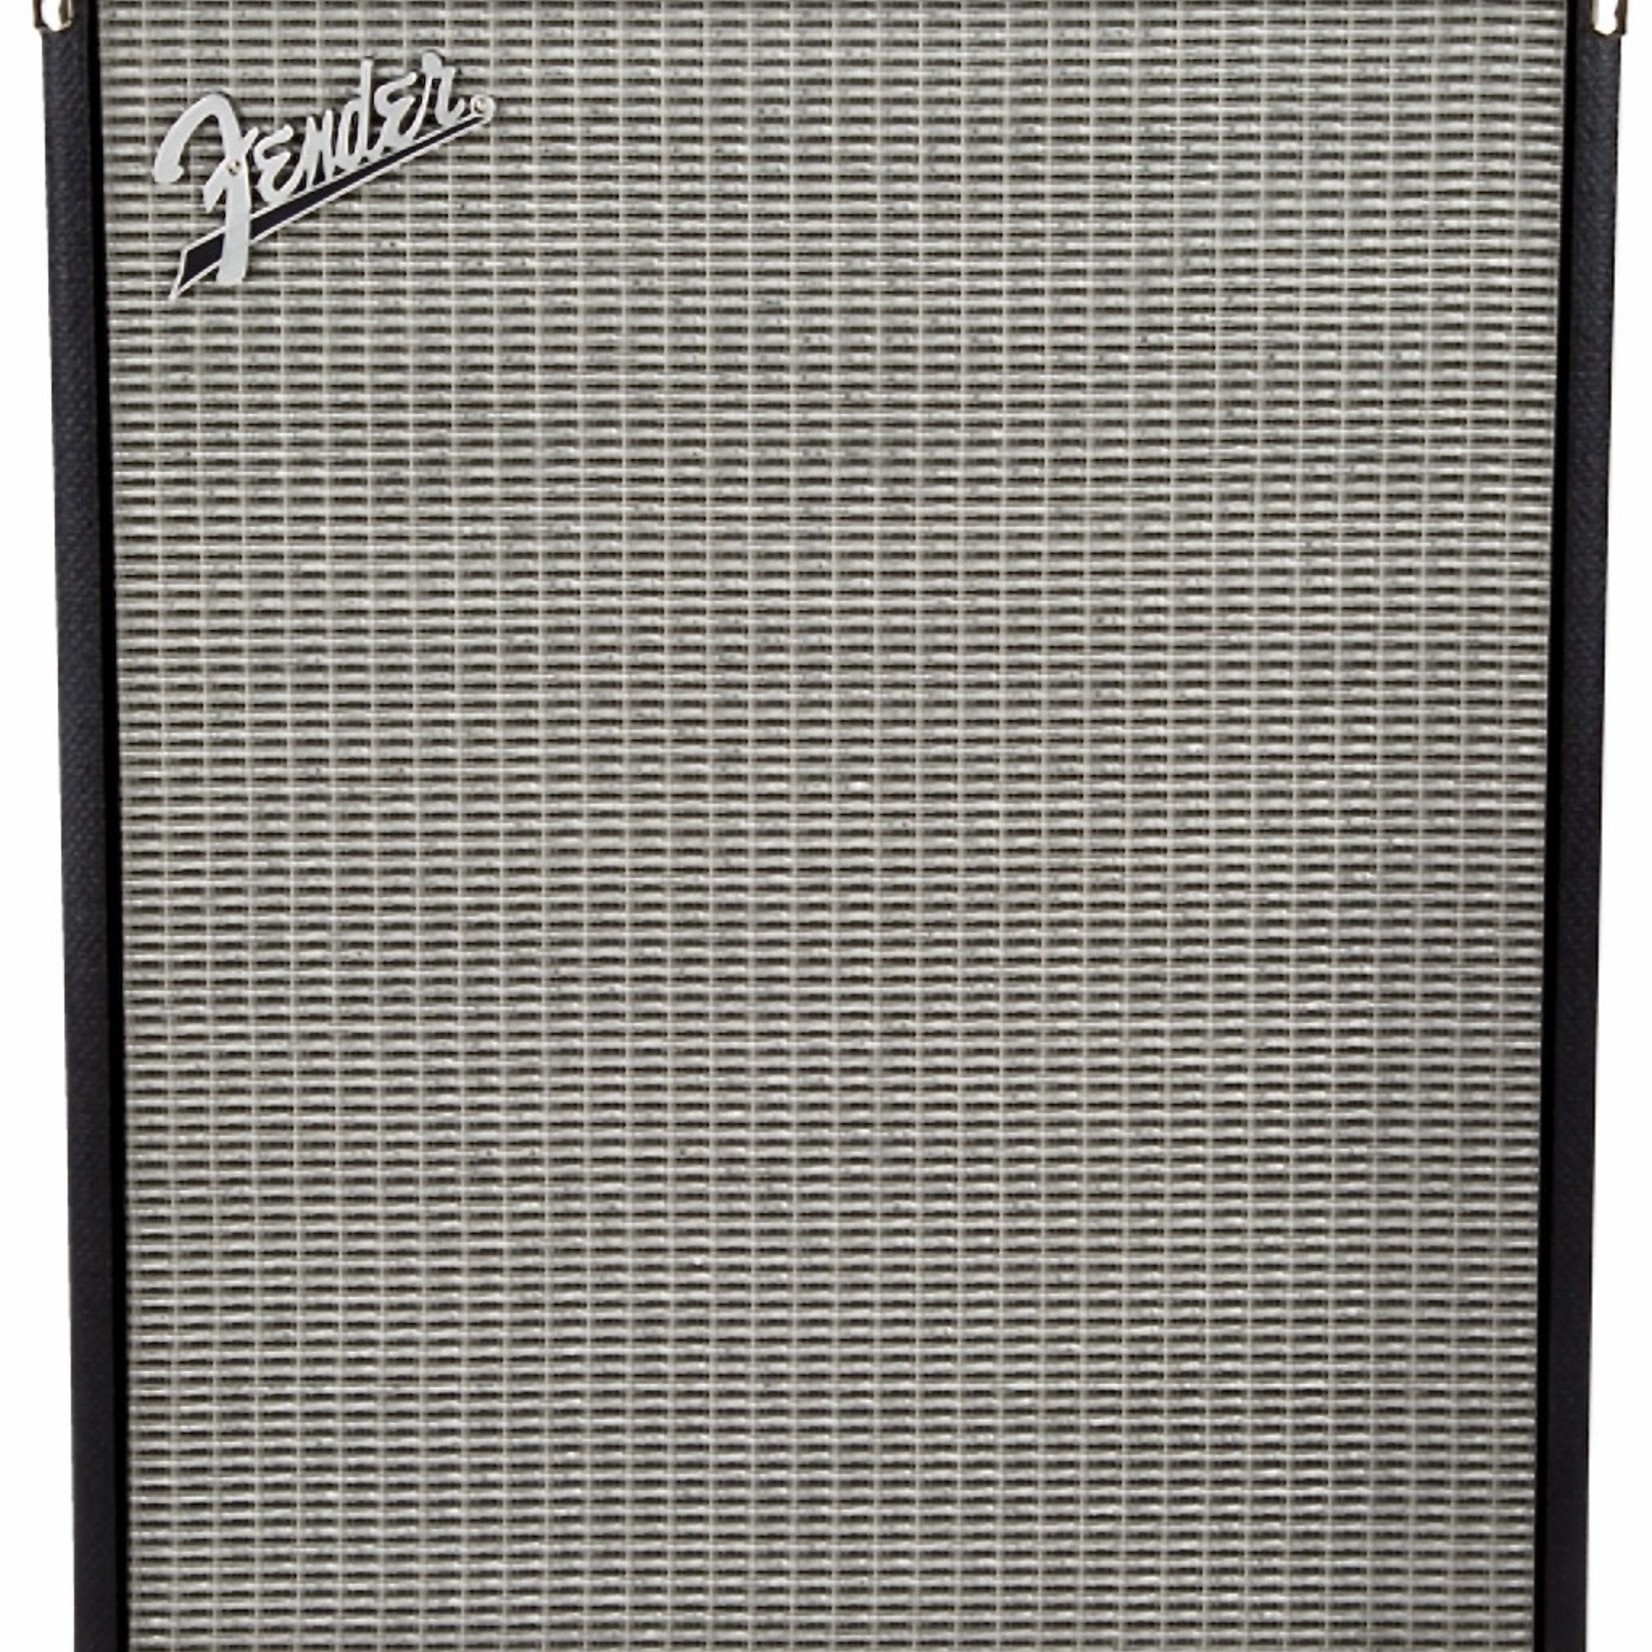 Fender Fender Rumble™ 210 Cabinet, Black and Silver